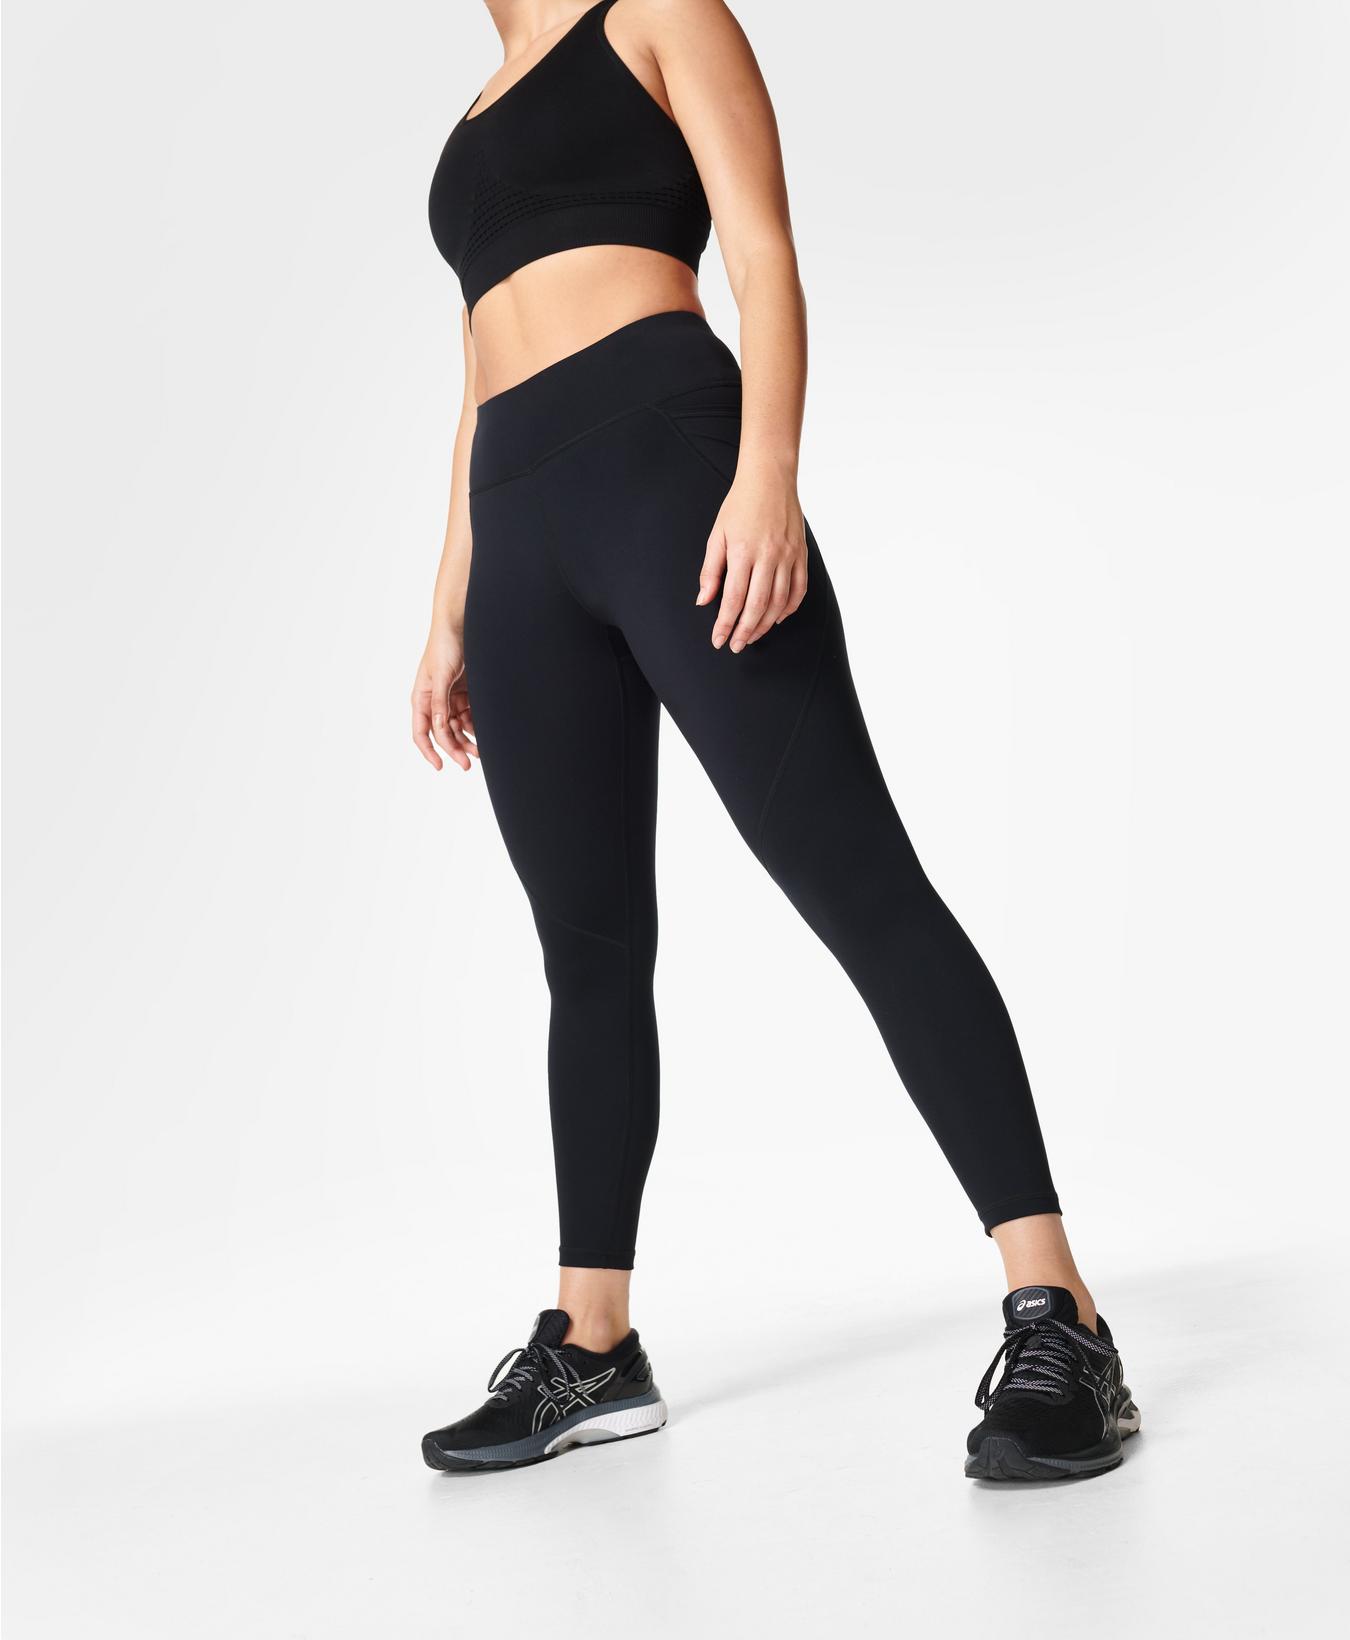 Do you think it is appropriate to wear compression leggings to the gym? -  Quora